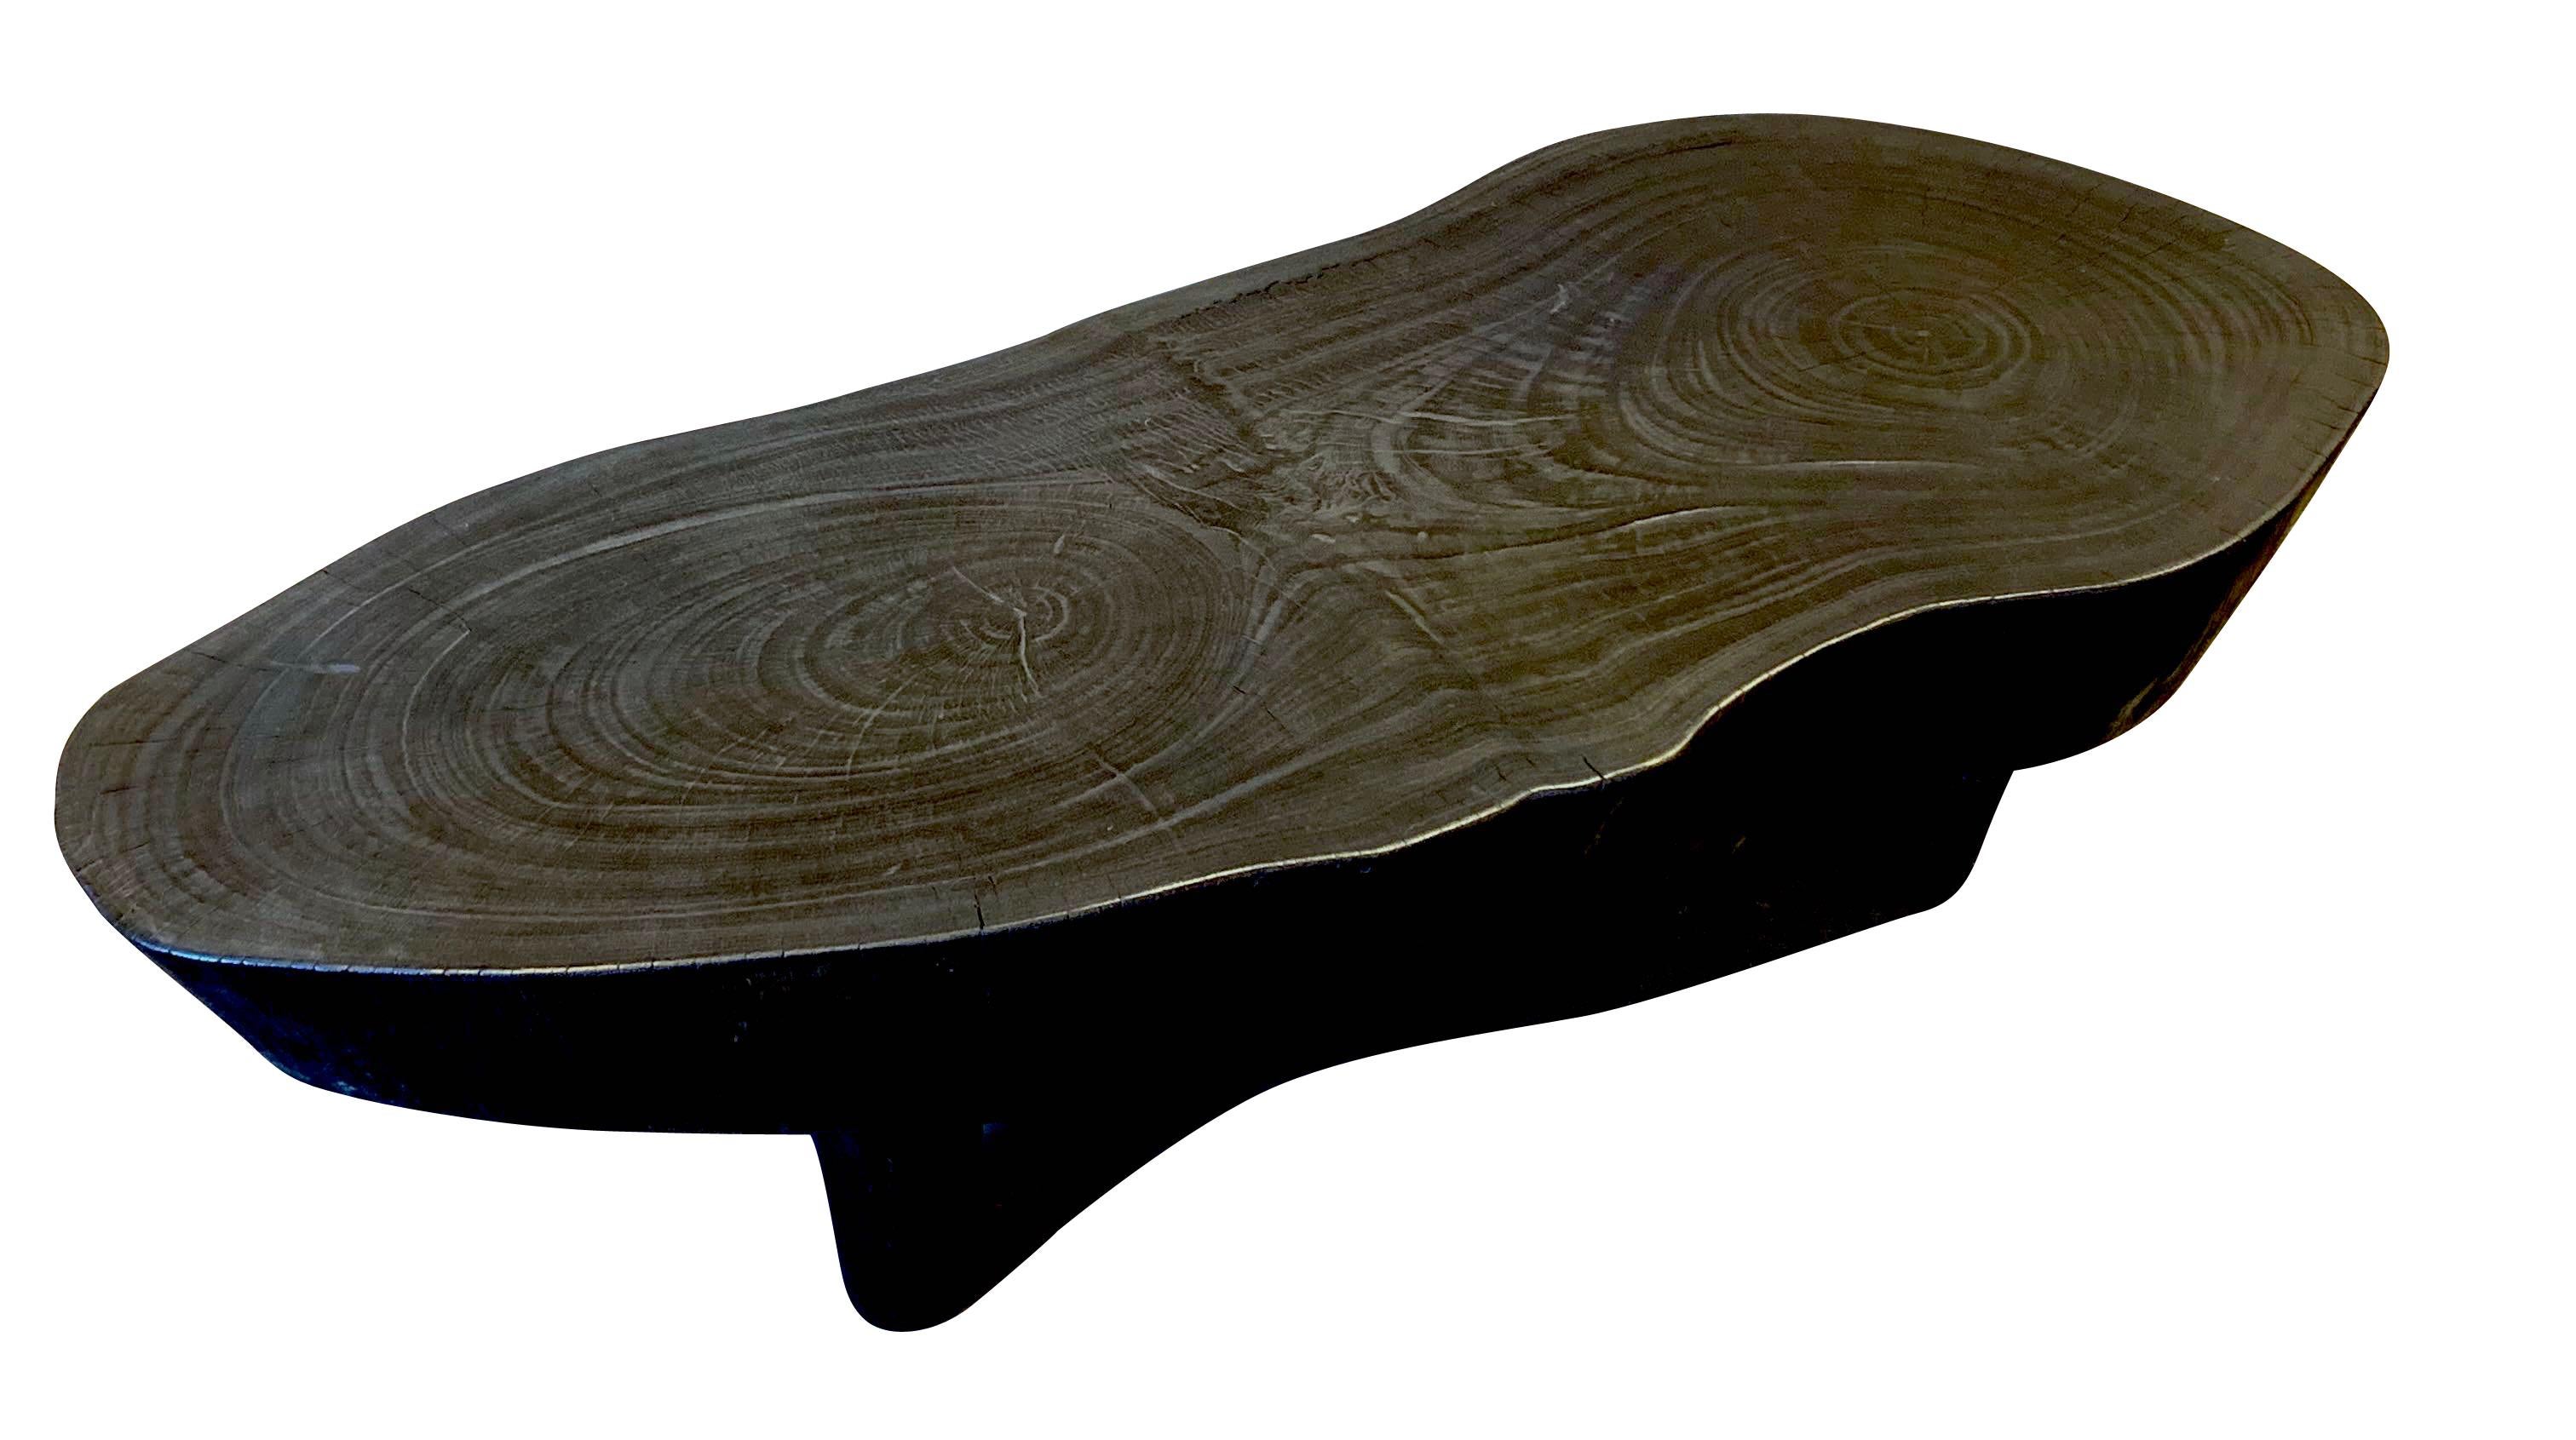 Freeform Suar Wood Coffee Table, Indonesia, Contemporary In New Condition In New York, NY